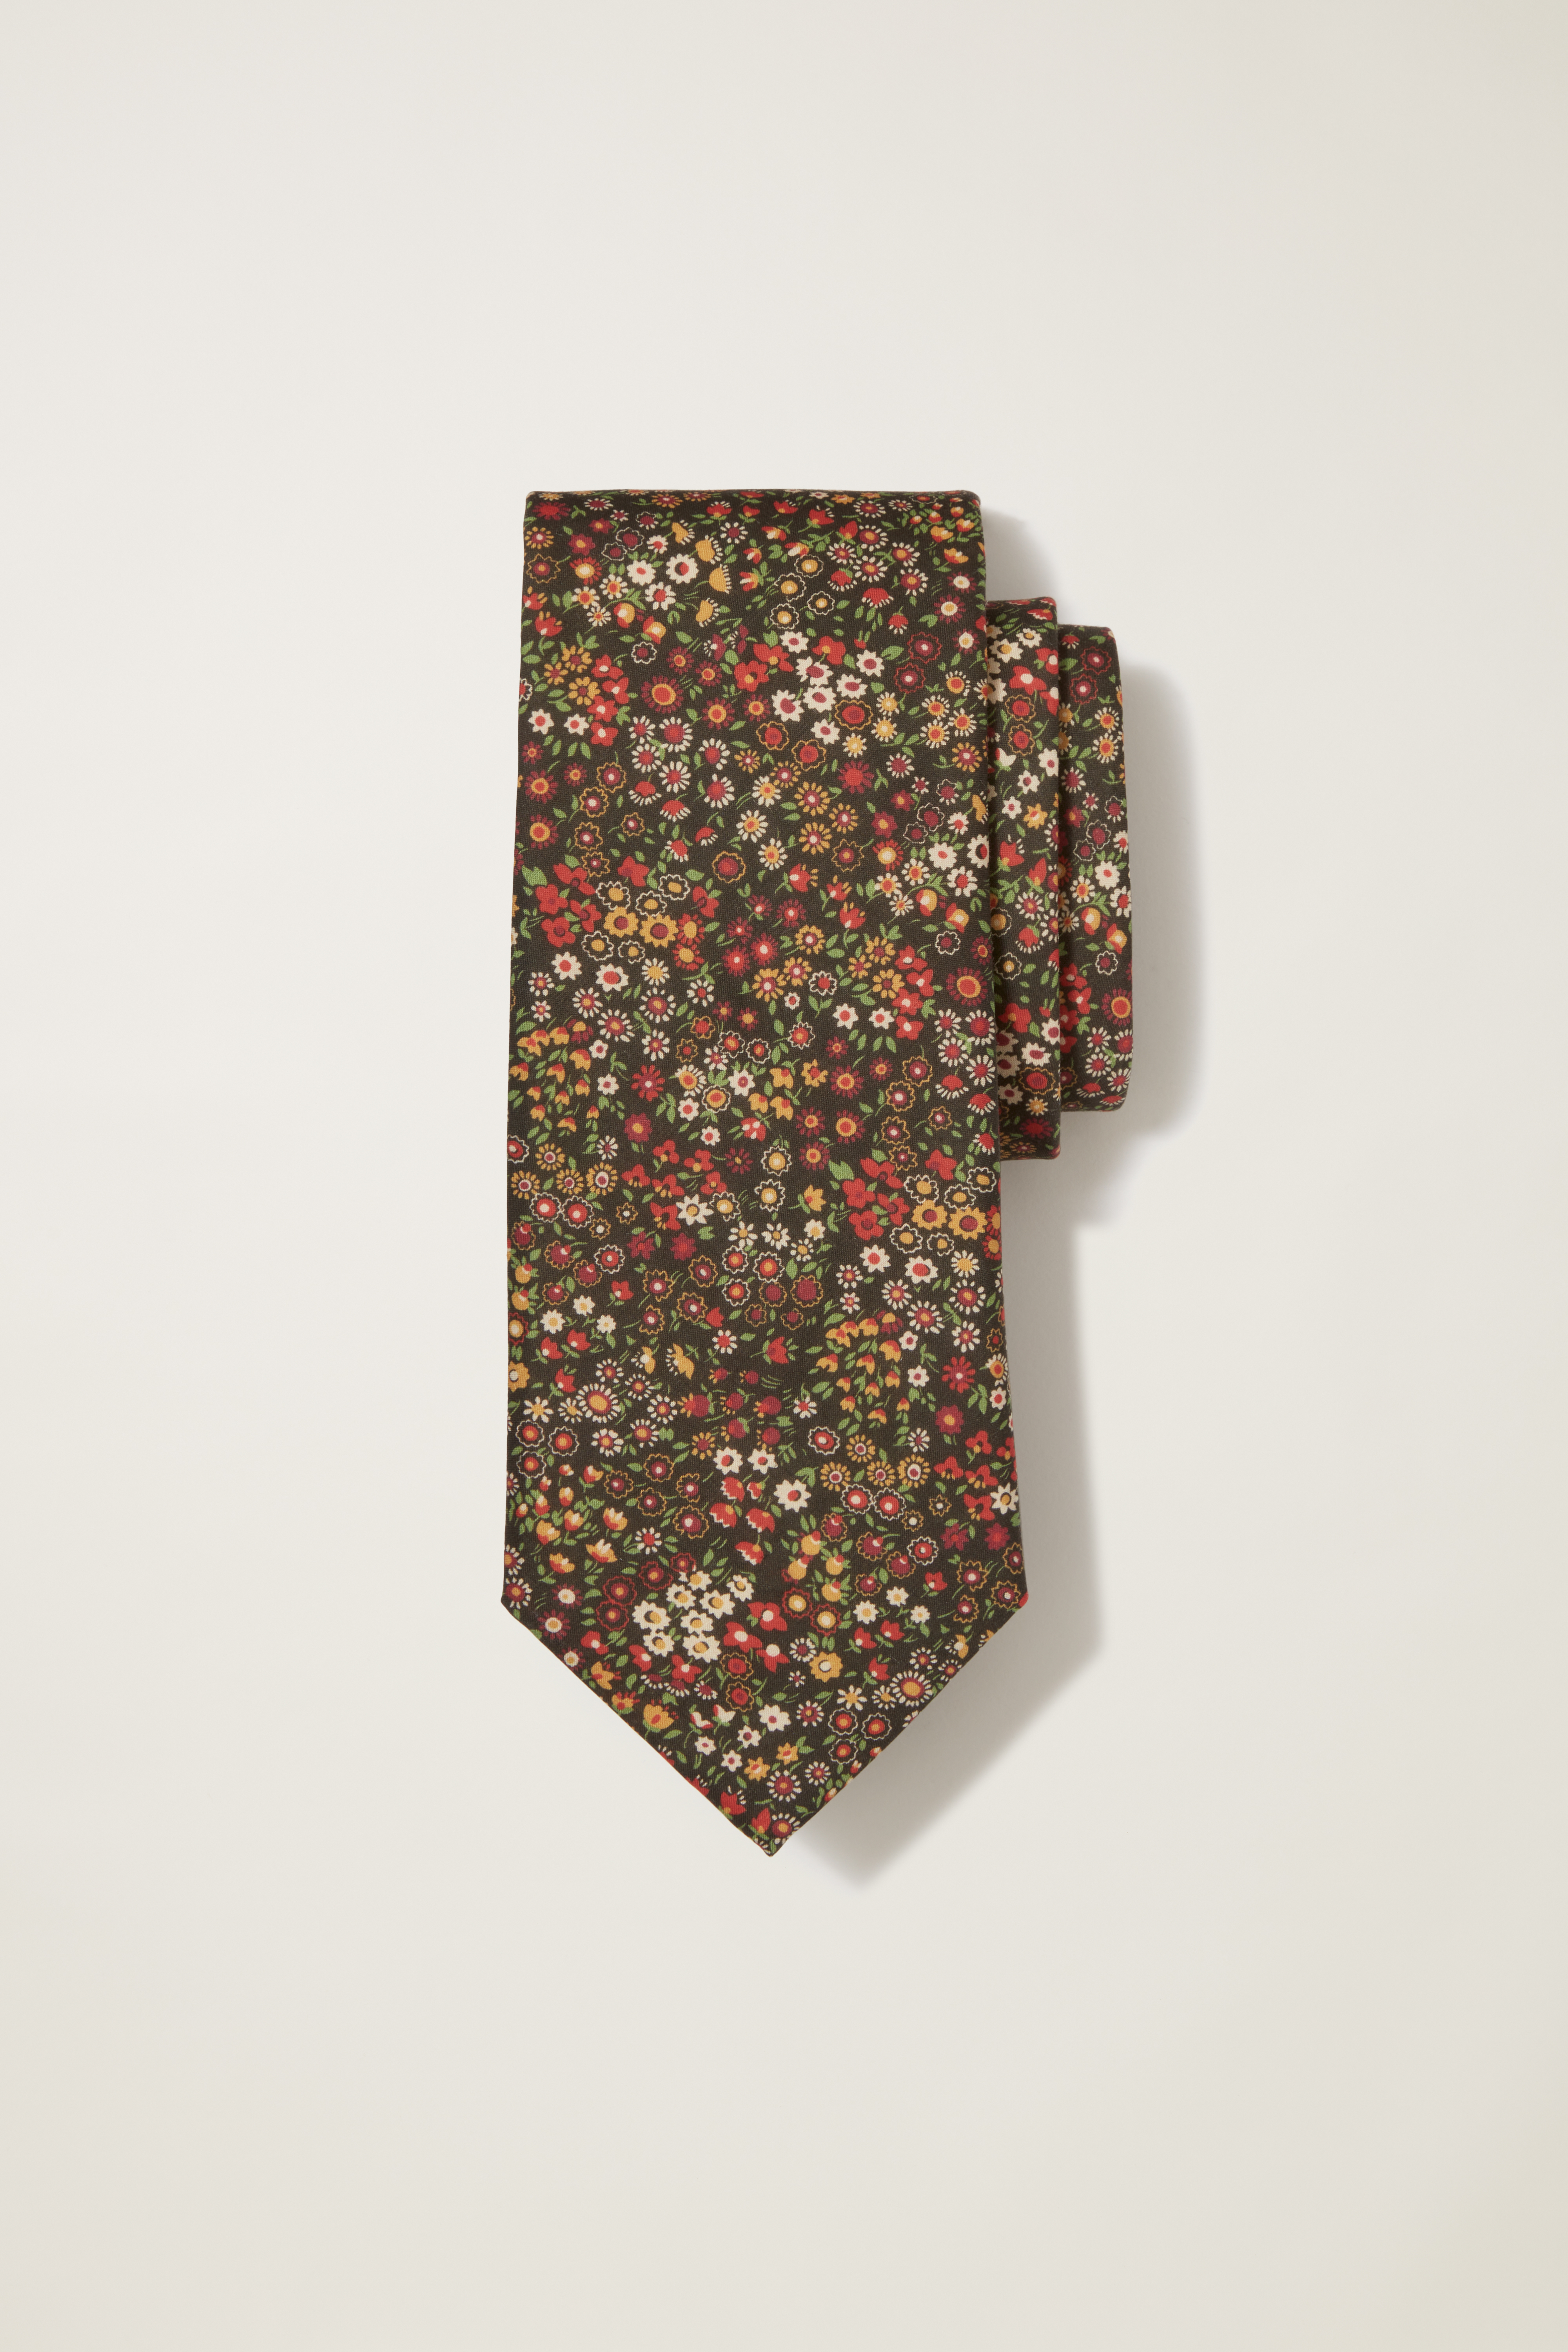 Pull Your Look Together With Bonobos' Cotton Necktie